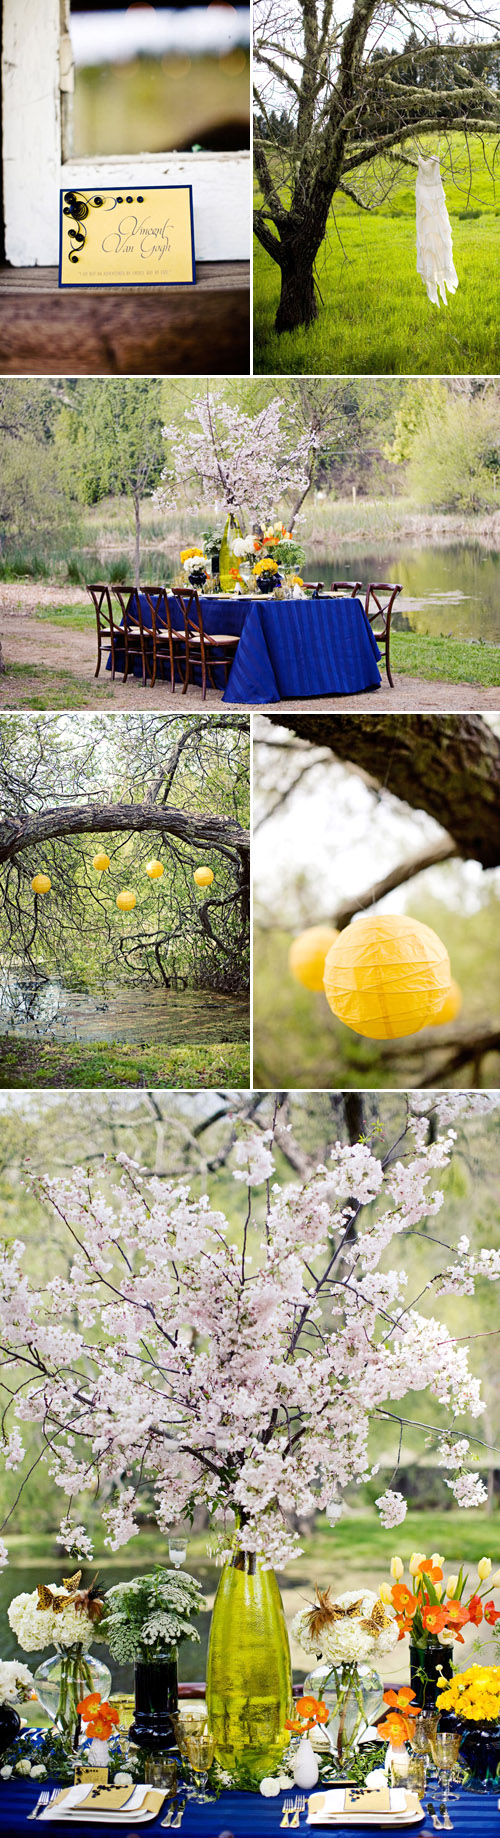 van gogh's starry night wedding table top and floral decor inspiration, images by meg perotti